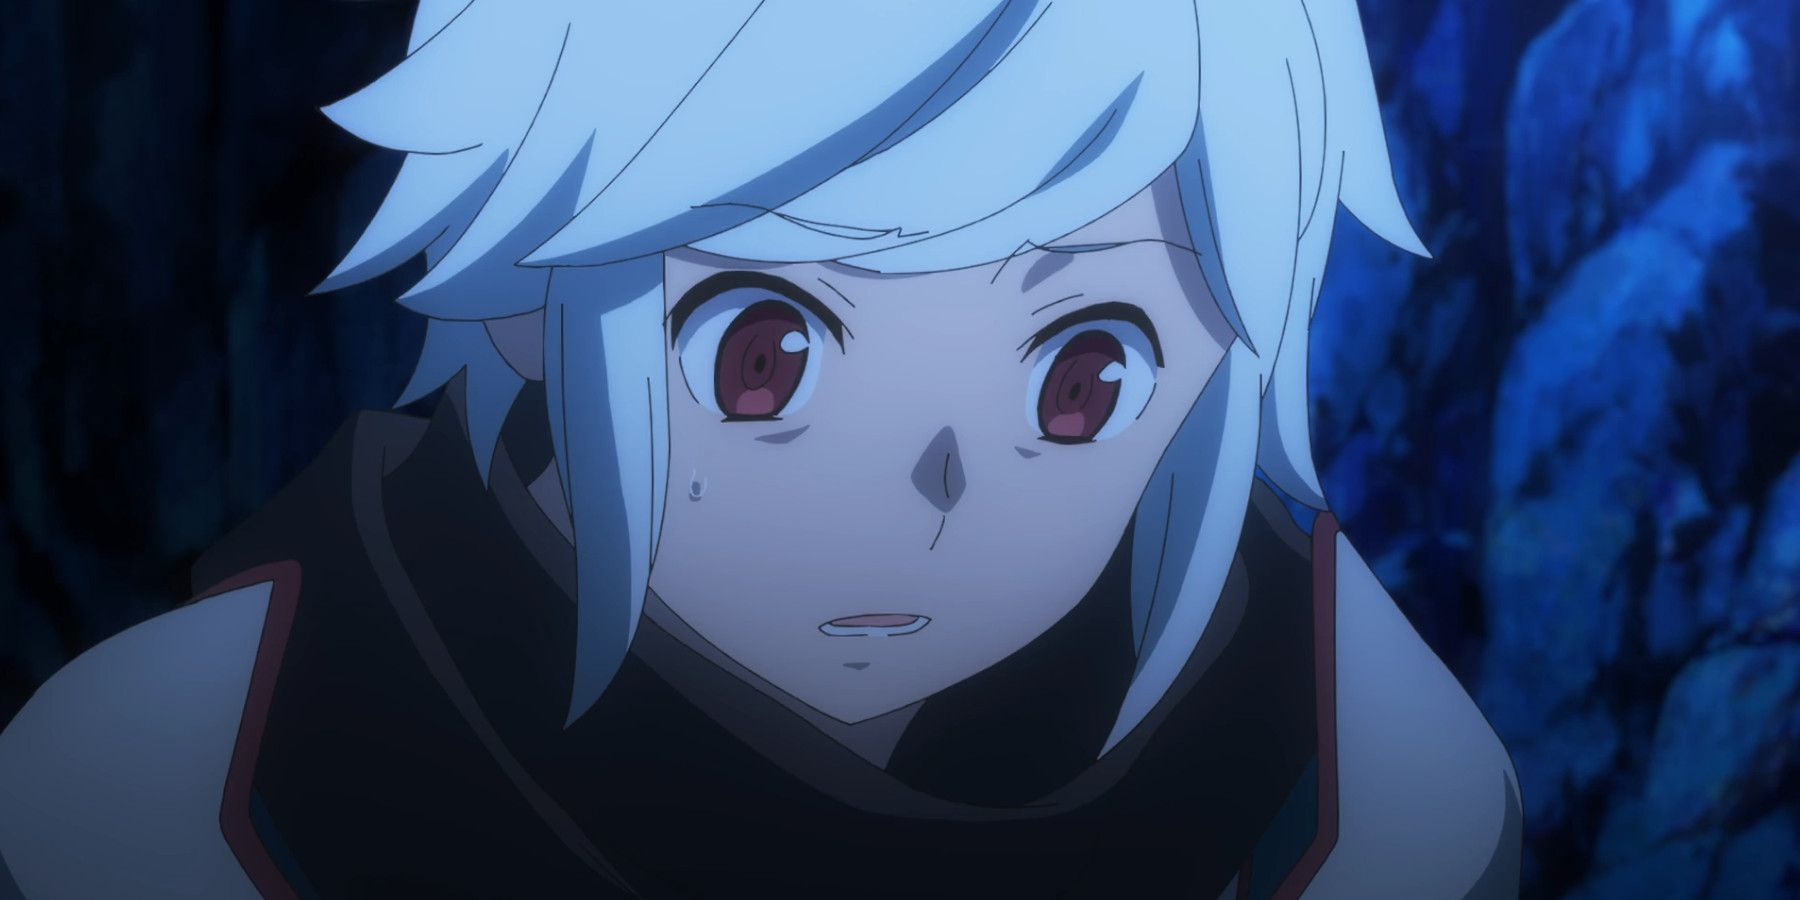 Is It Wrong to Try to Pick Up Girls in a Dungeon? IV Episode #08 Anime  Review